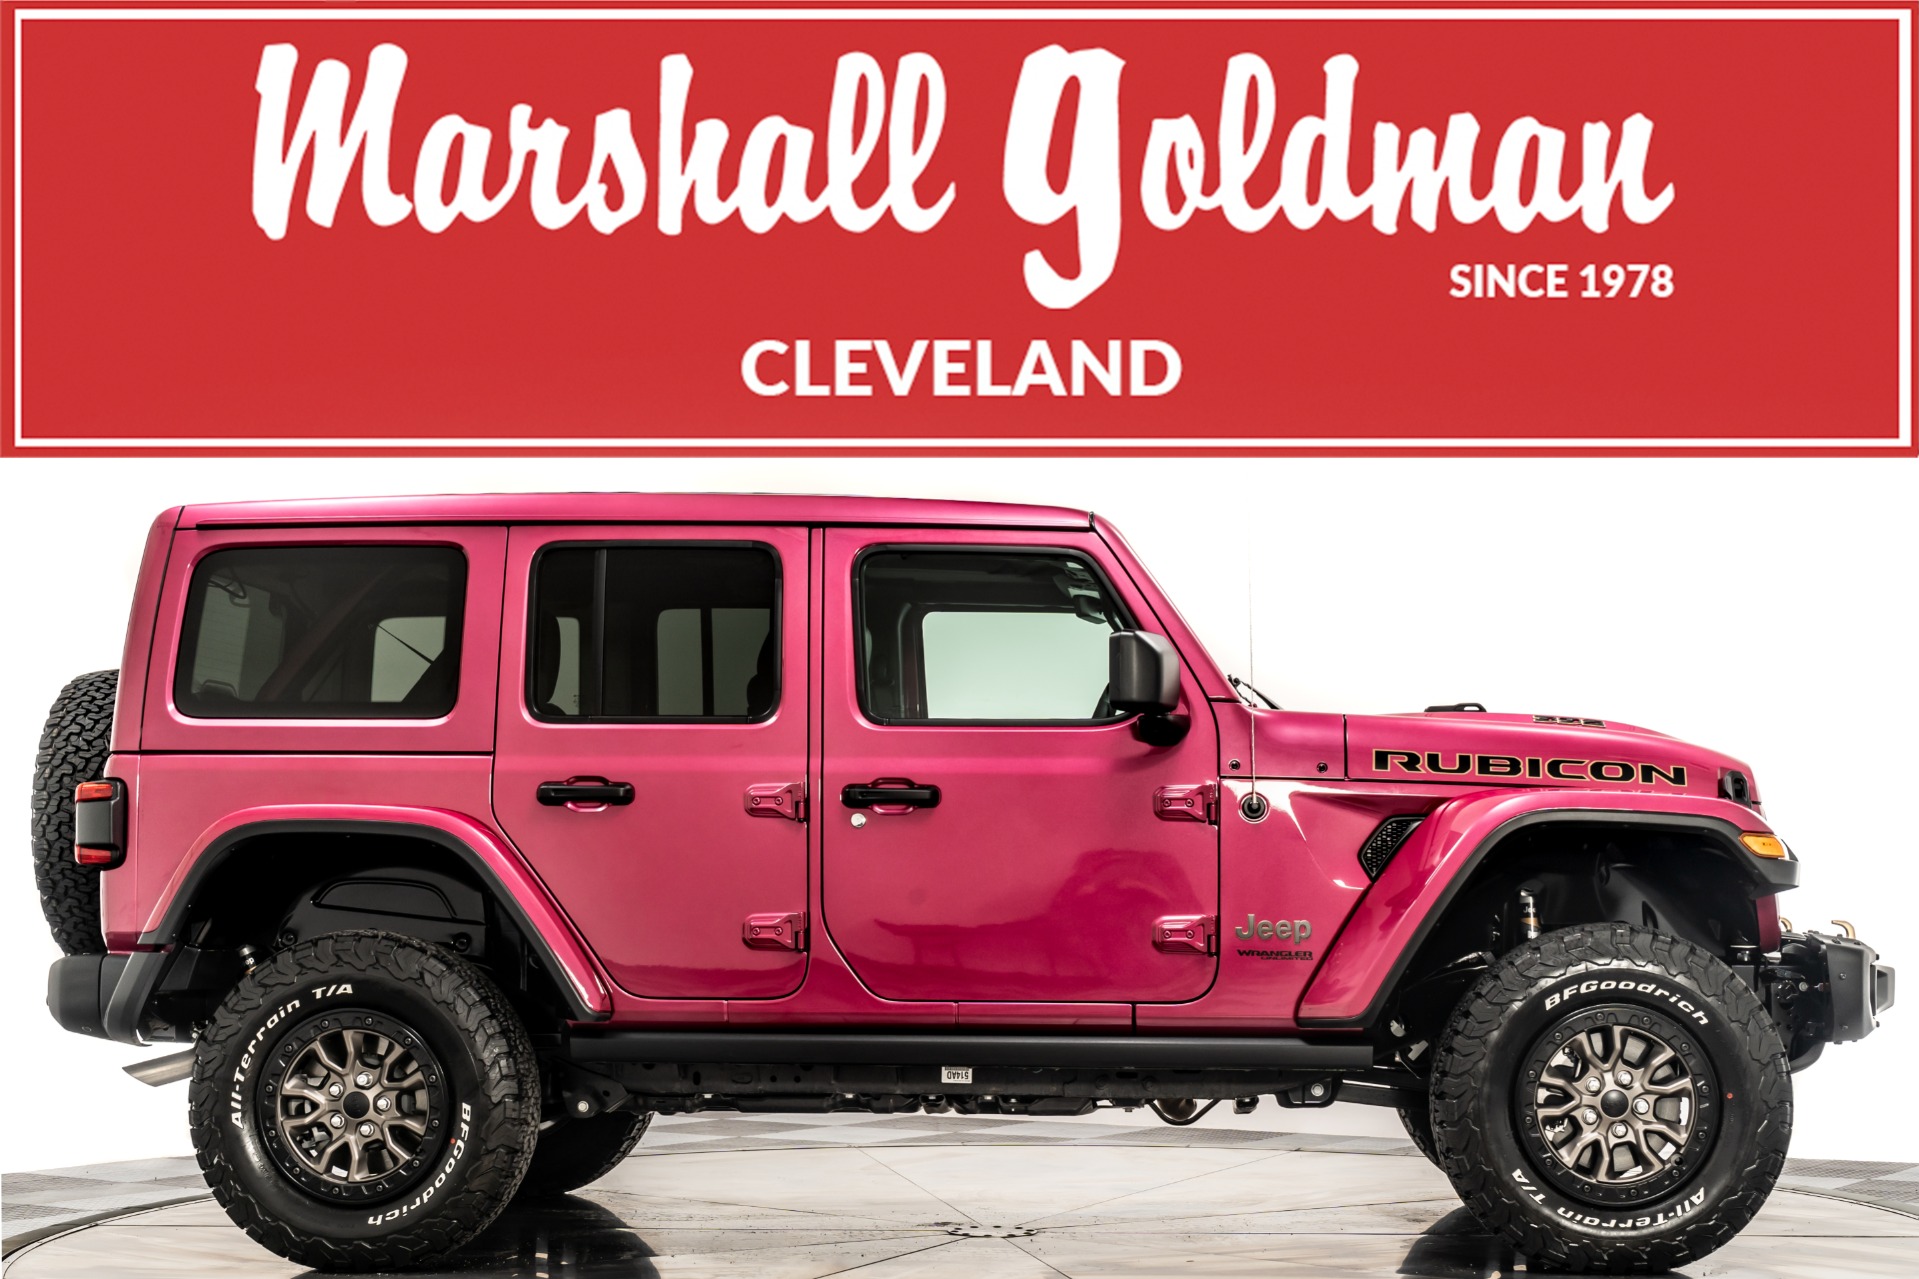 Used 2021 Jeep Wrangler Rubicon 392 For Sale (Sold) | Marshall Goldman  Cleveland Stock #W23094